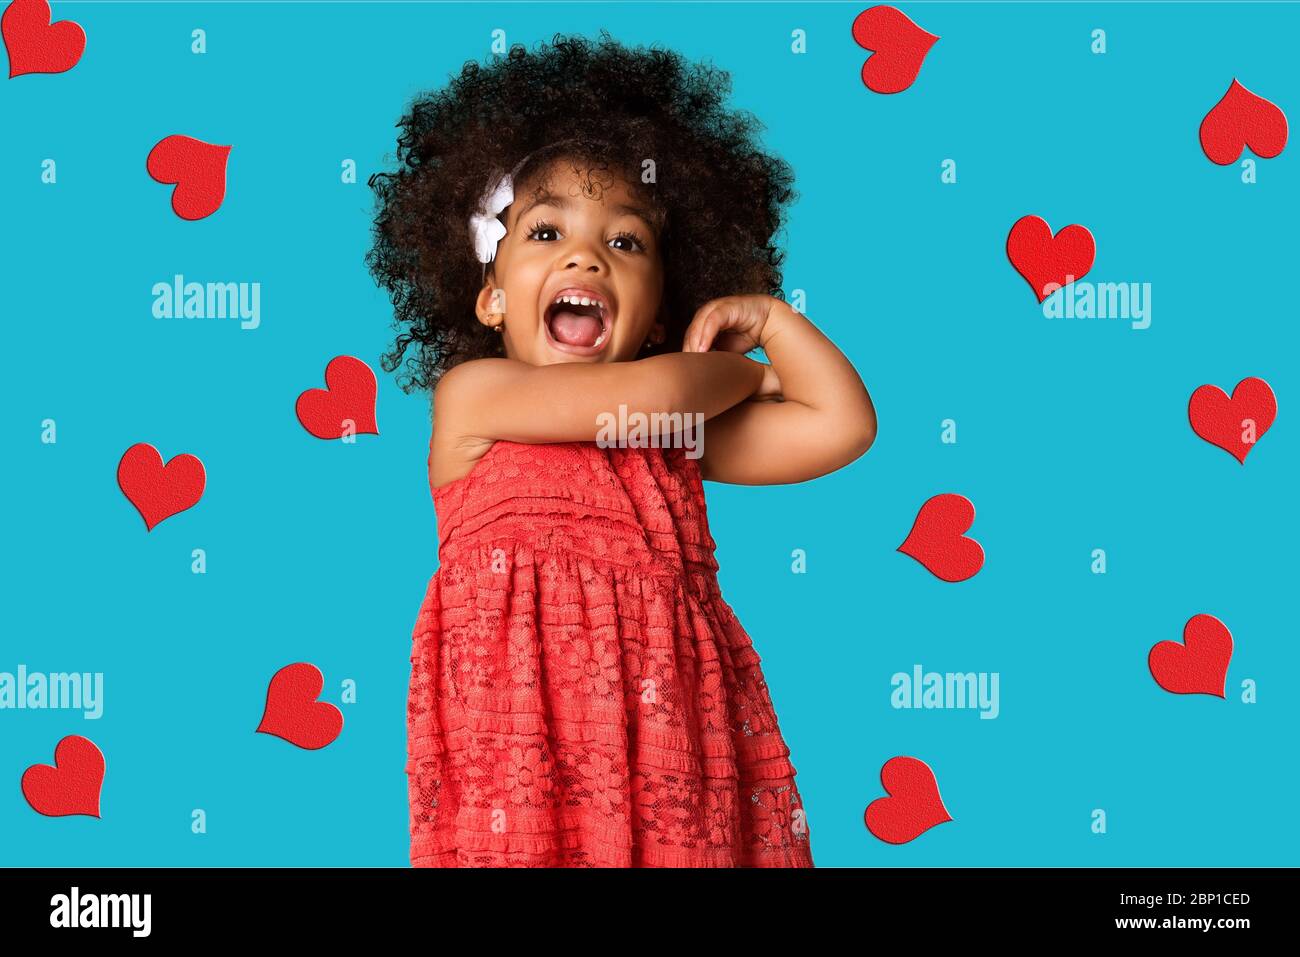 Portrait of cheerful happy african american little girl, over colored background with hearts Stock Photo